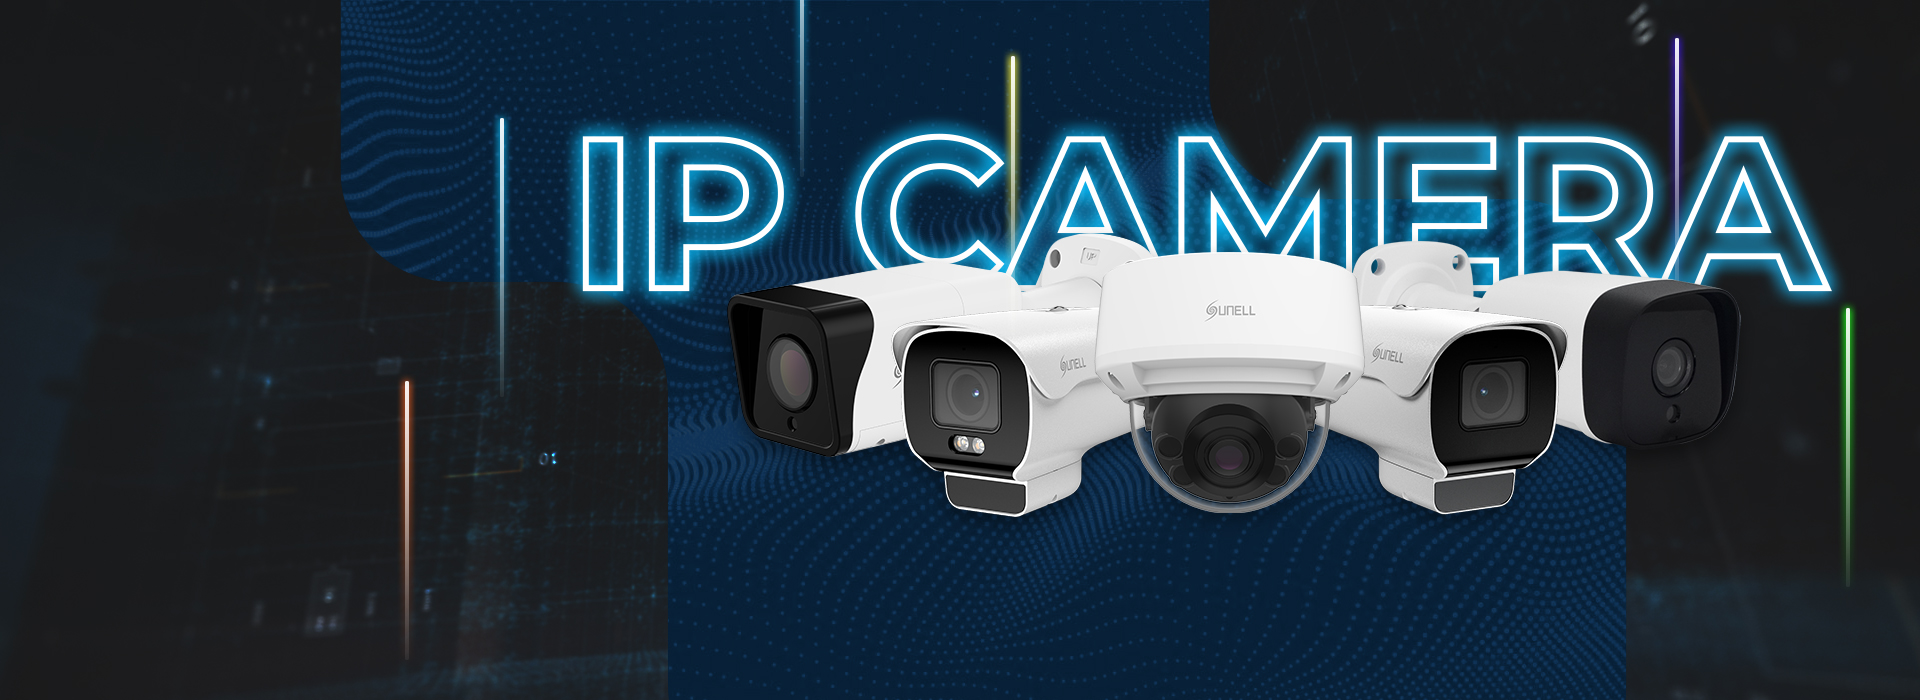 Overview of IP Cameras